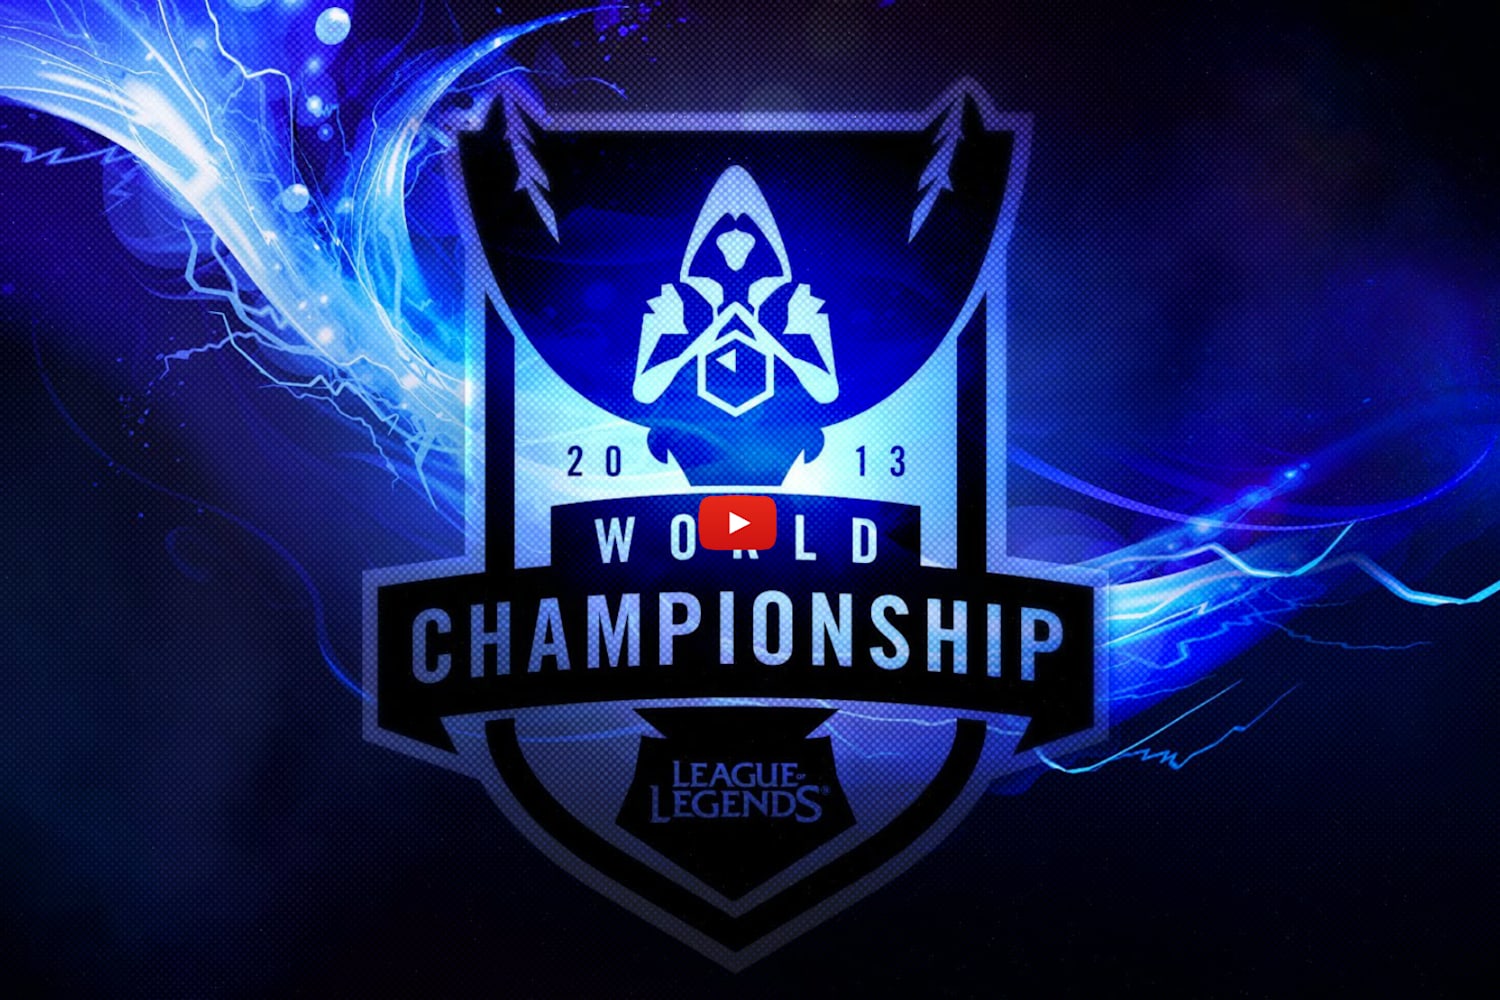 Watch the League of Legends Championship